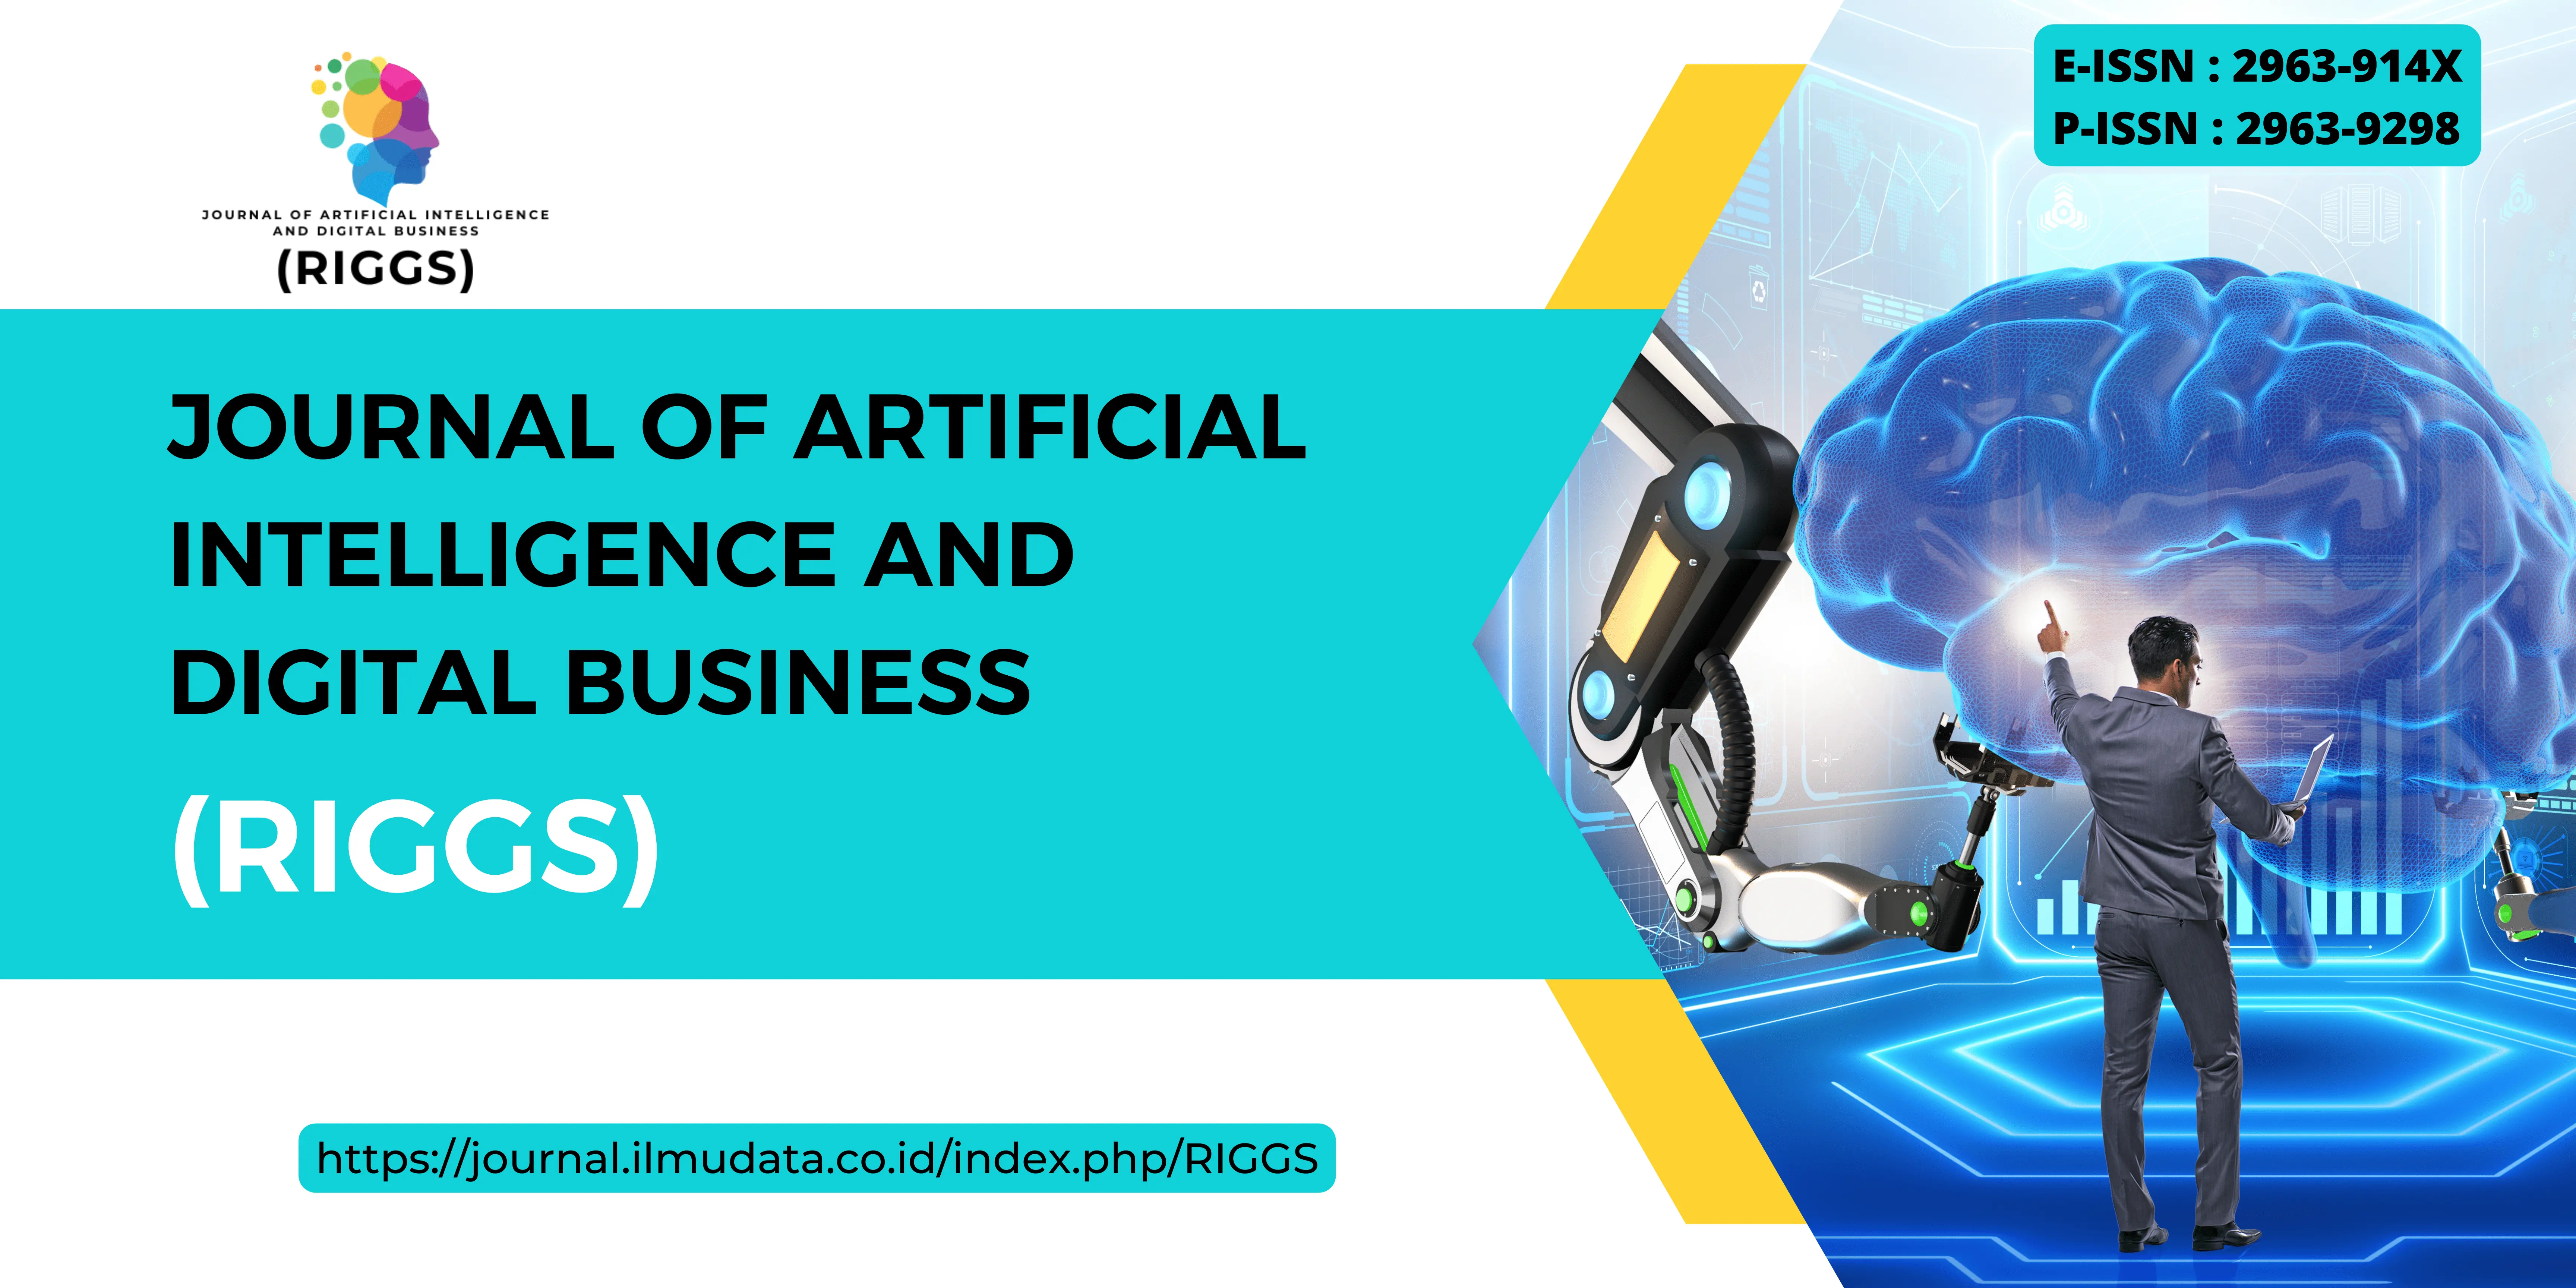 Journal of Artificial Intelligence and Digital Business (RIGGS)